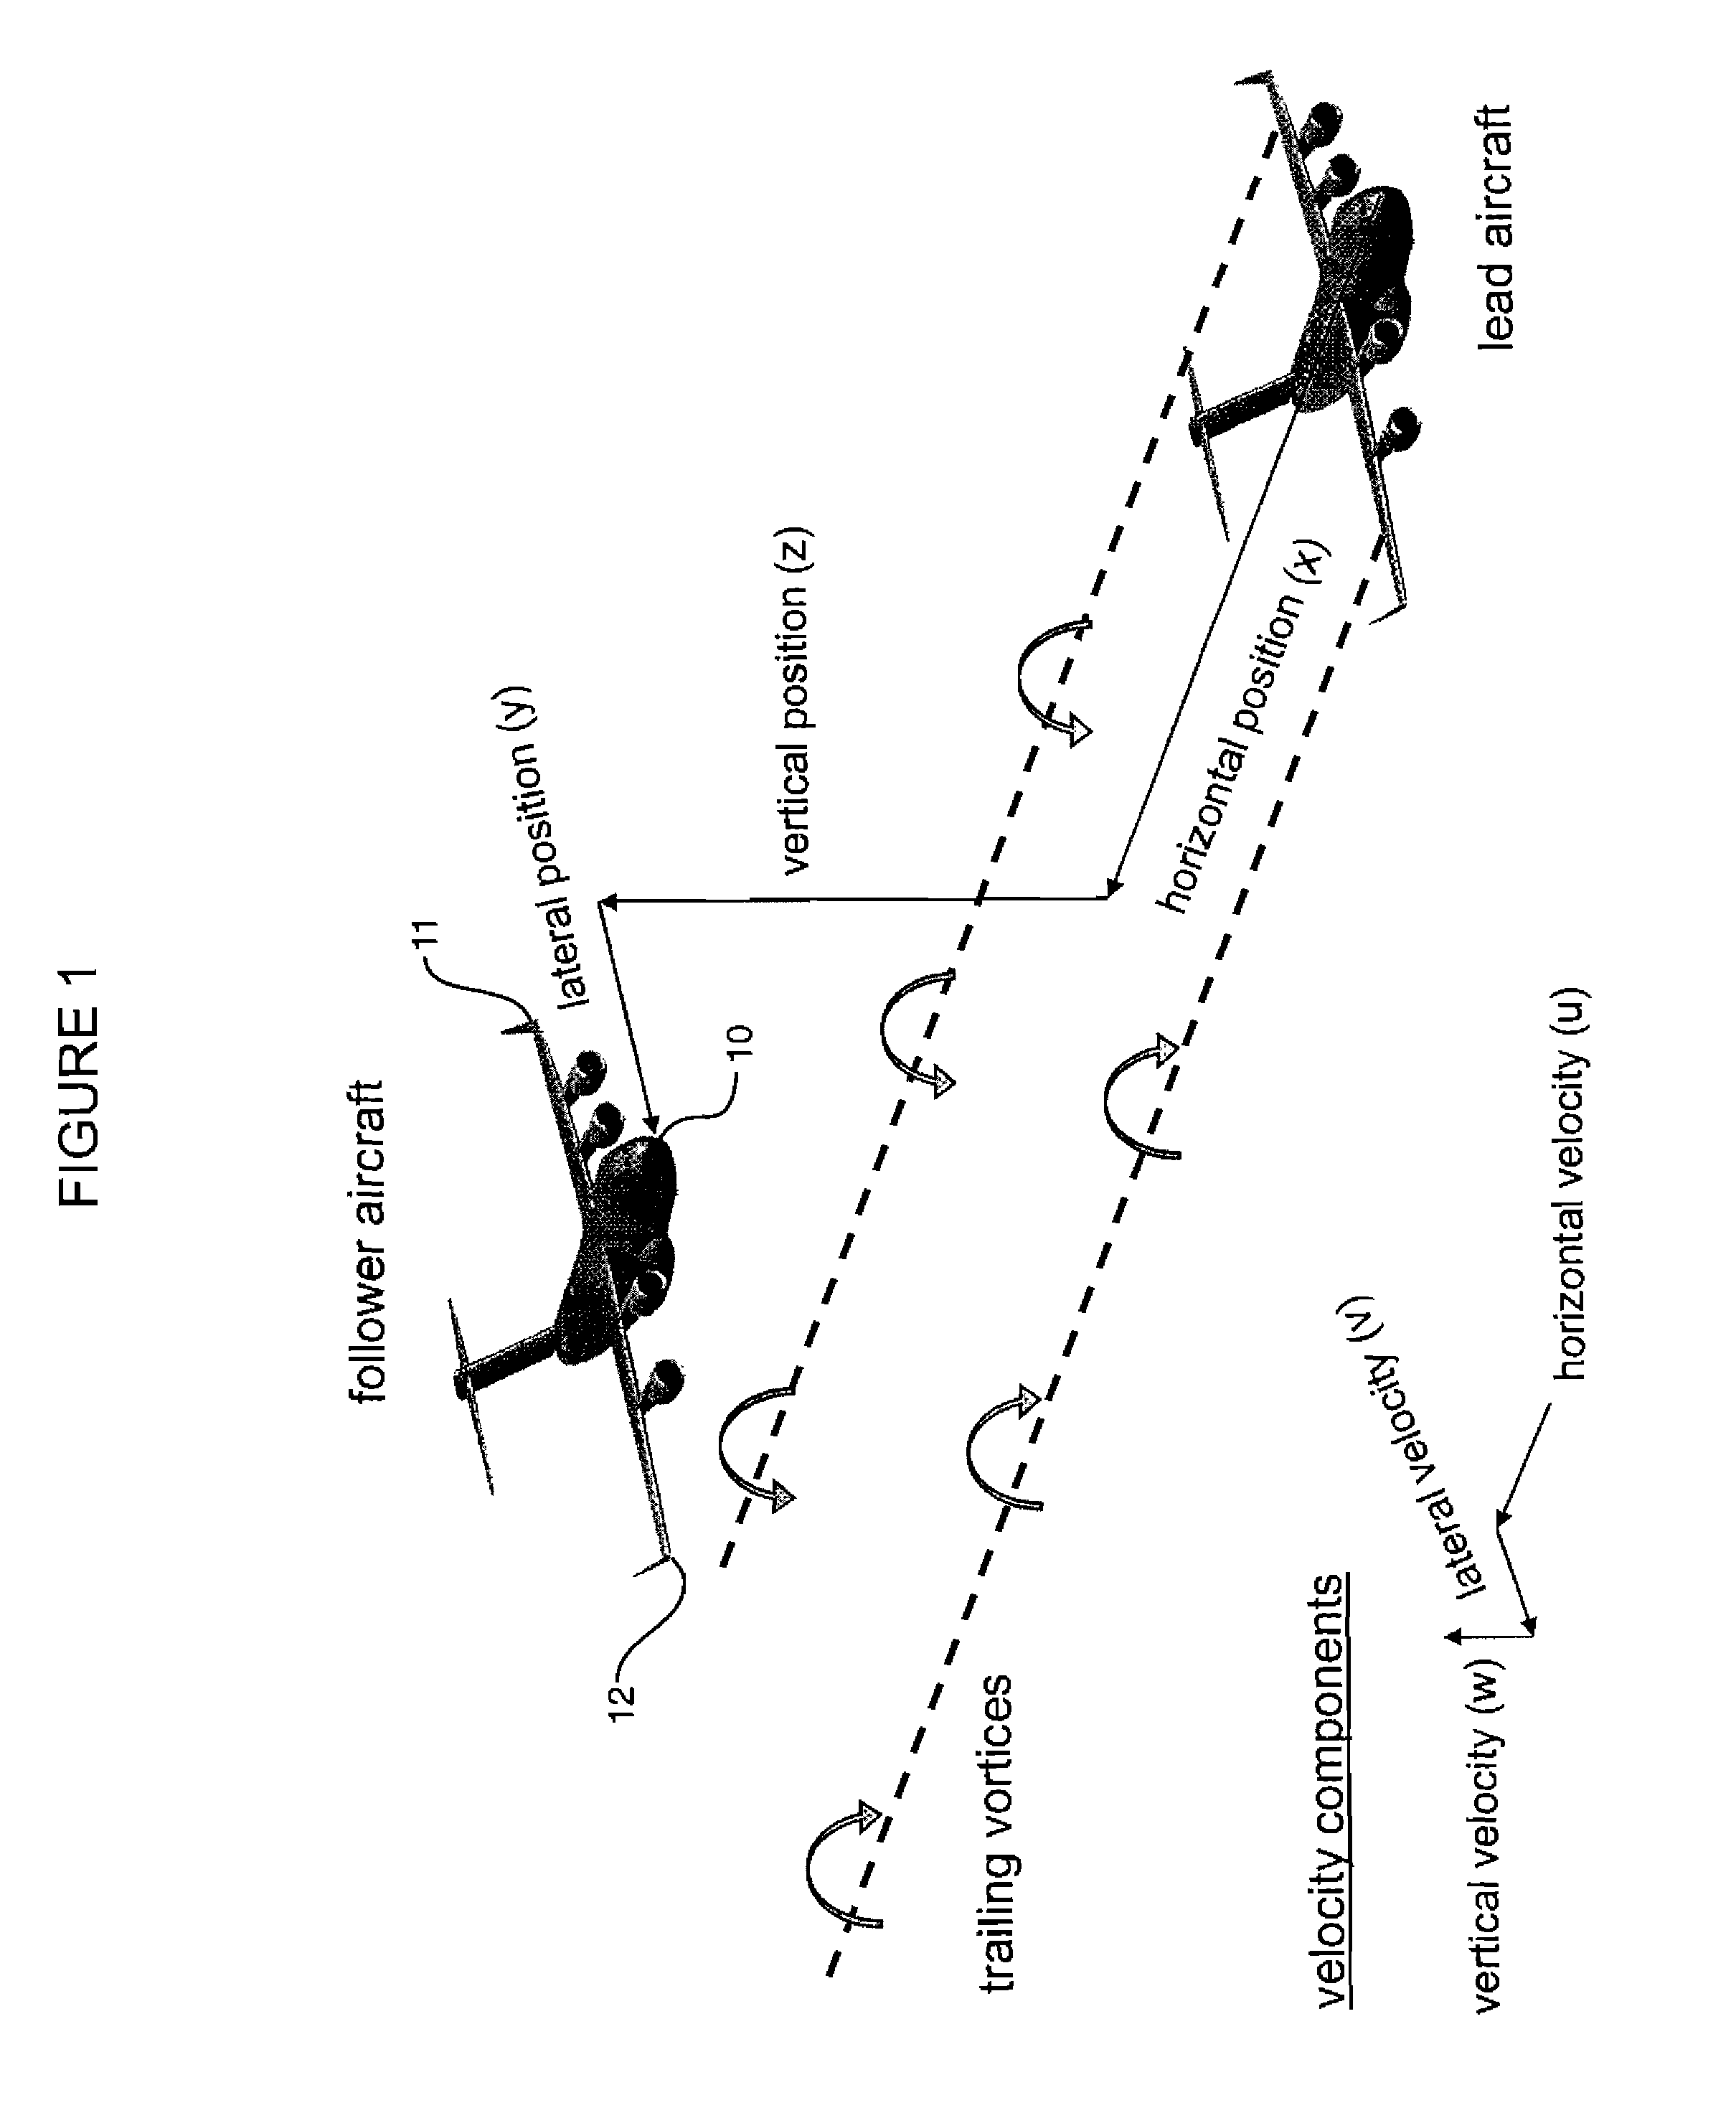 Close formation flight positioning system using air data measurements